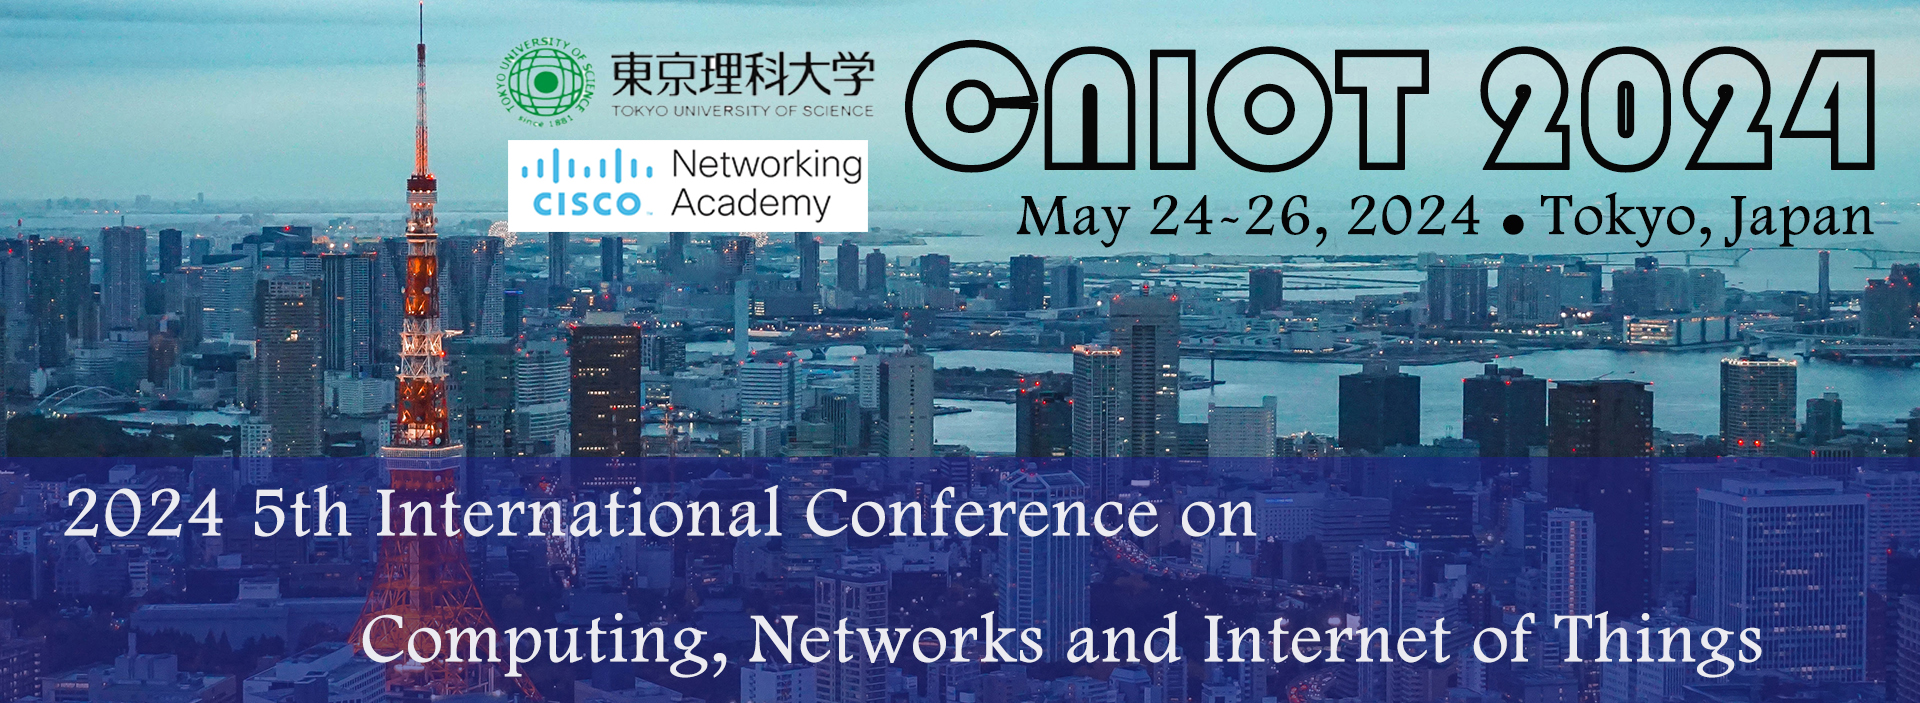 2024 5th International Conference on Computing, Networks and Internet of Things (CNIOT 2024) -EI Compendex, Tokyo, Japan